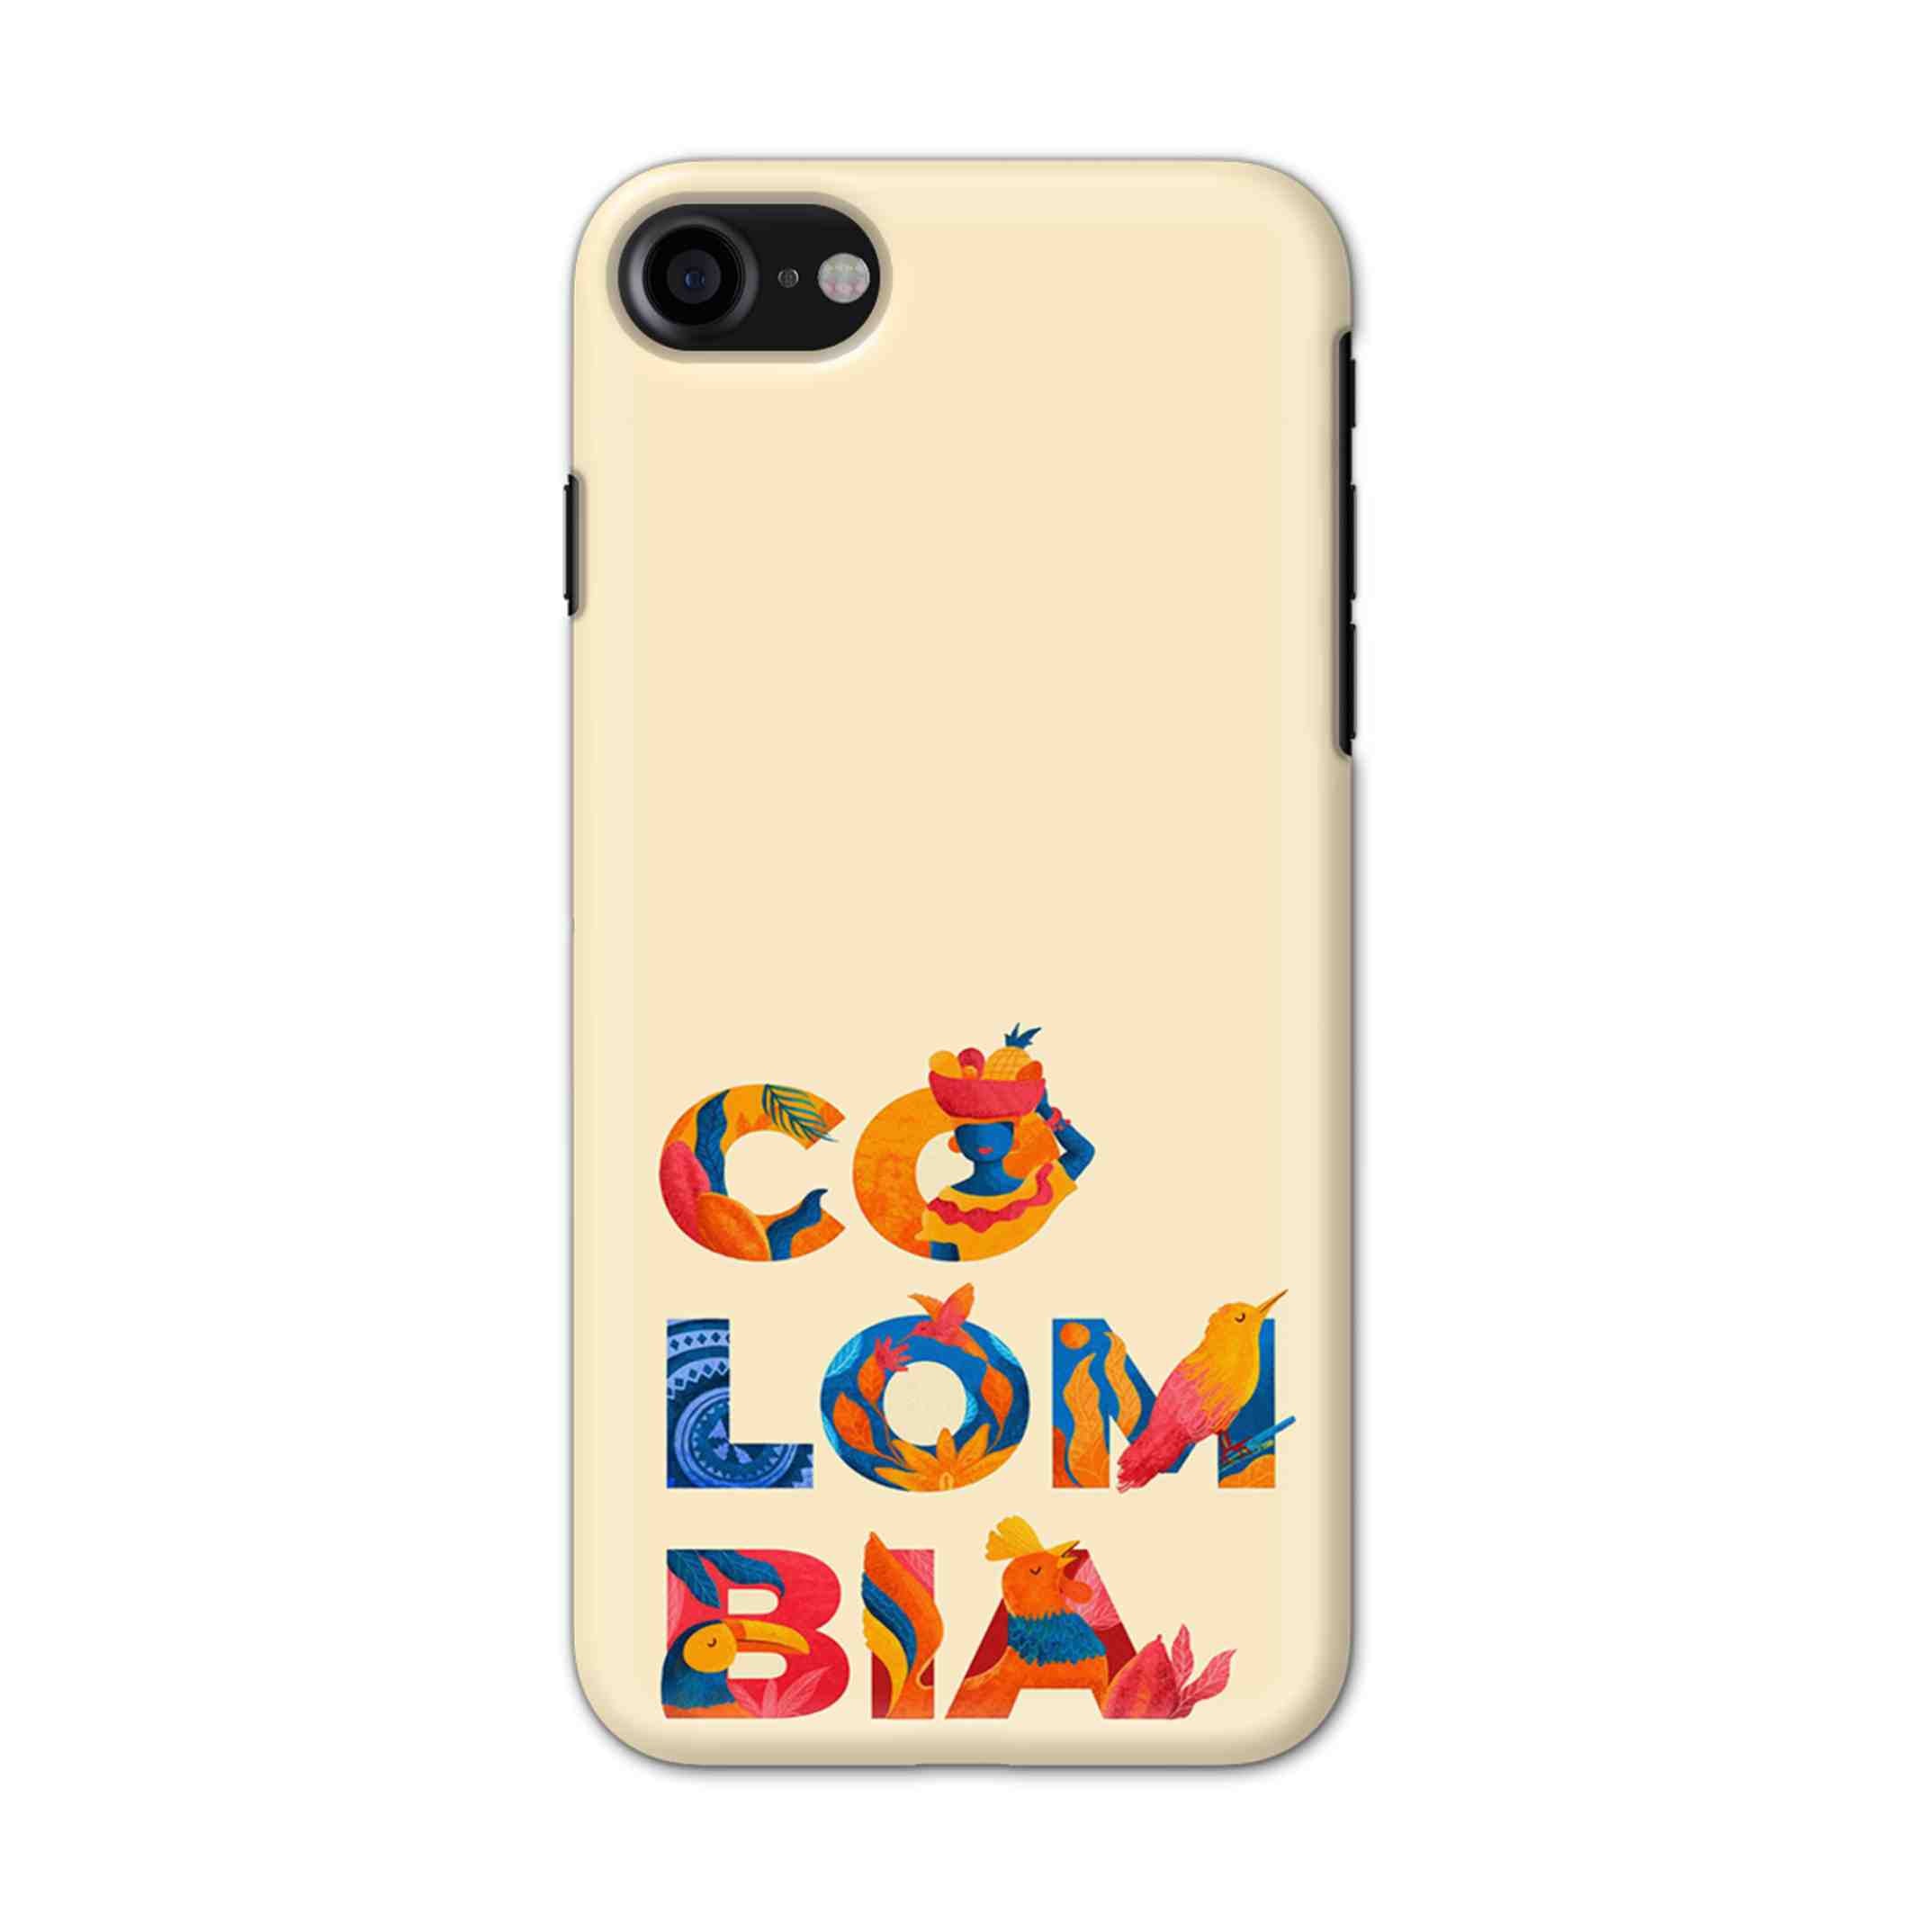 Buy Colombia Hard Back Mobile Phone Case/Cover For iPhone 7 / 8 Online